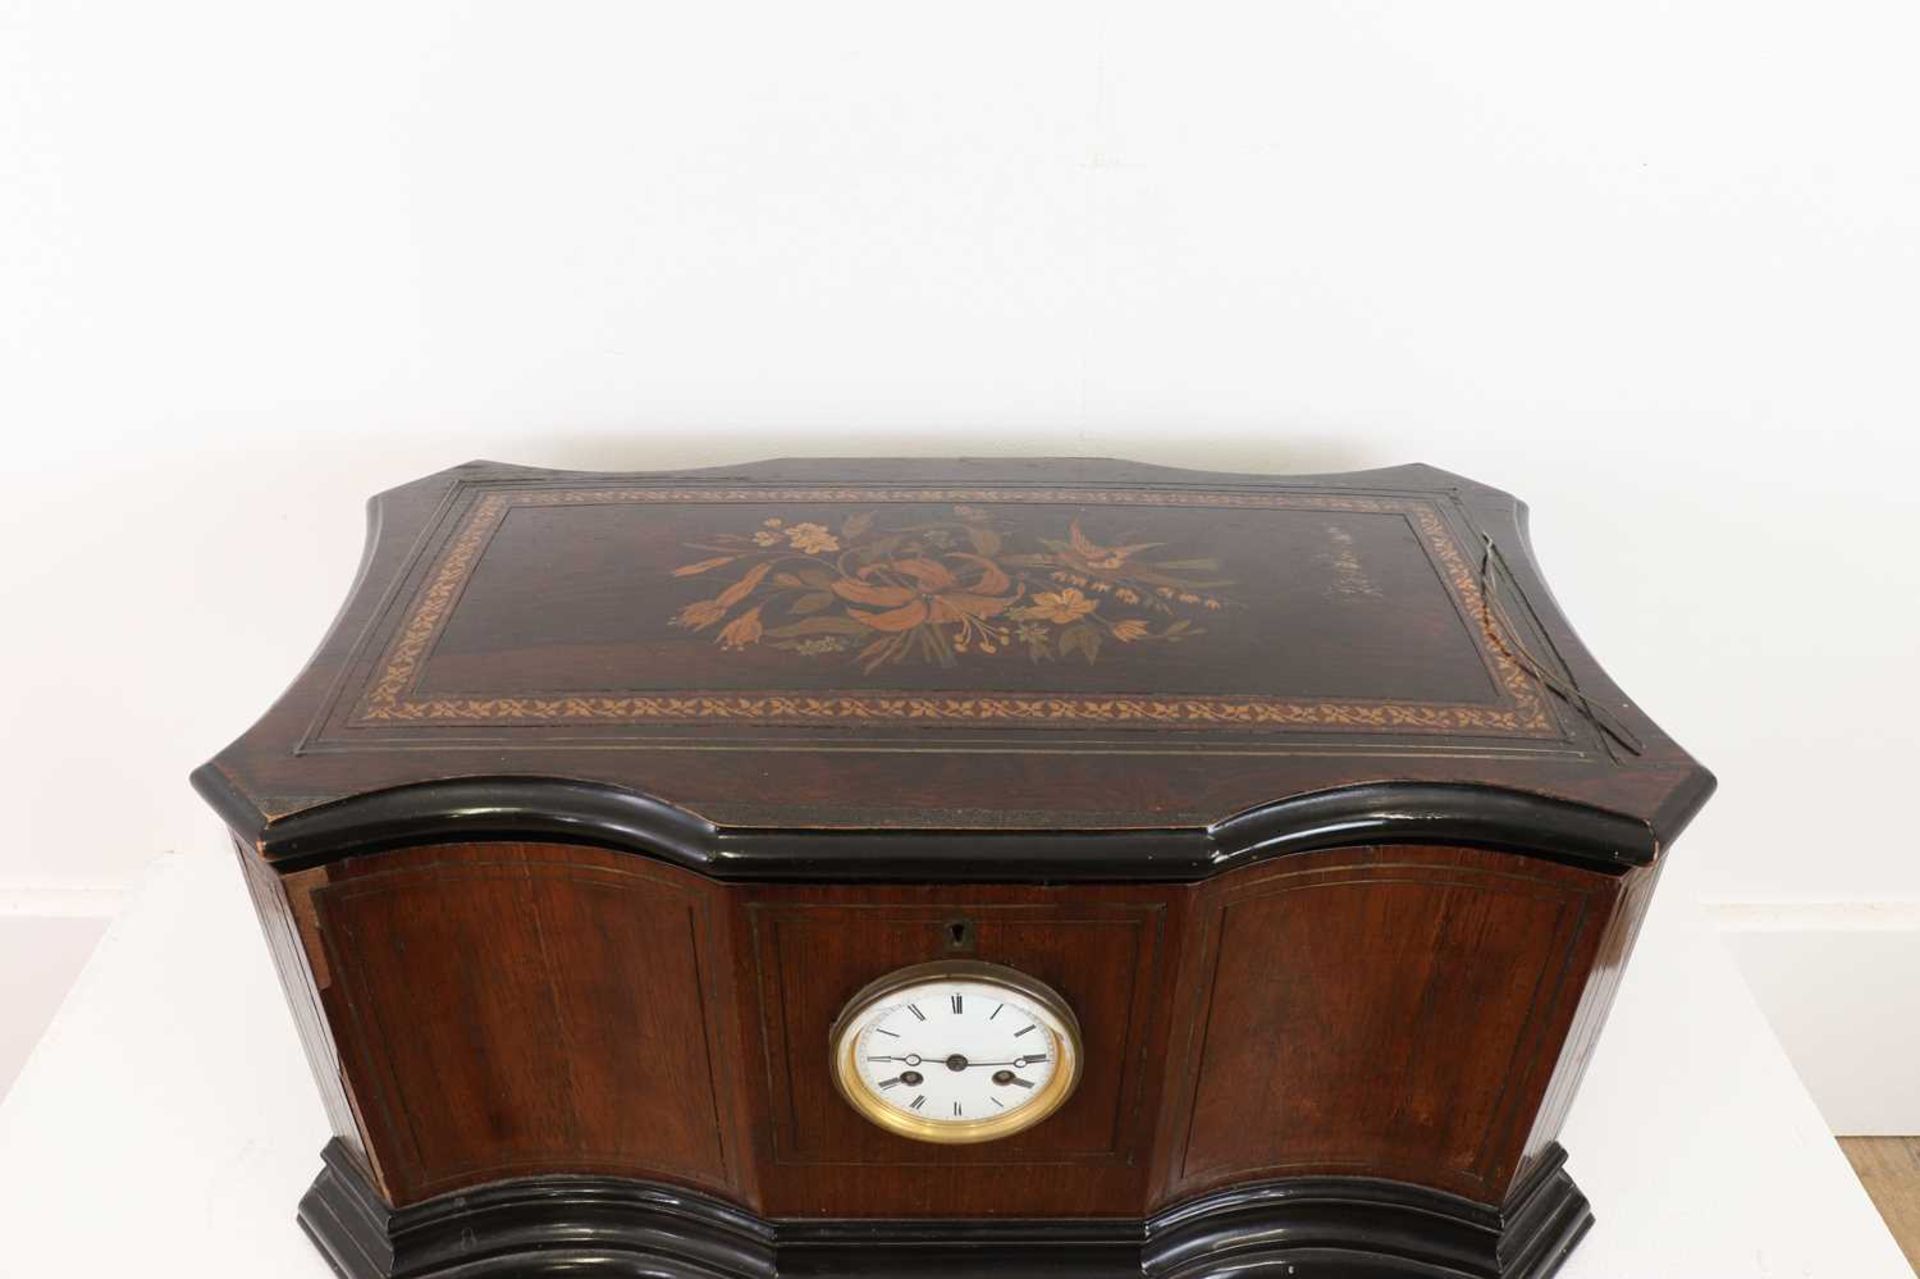 A rare bells-in-view musical box, - Image 3 of 8